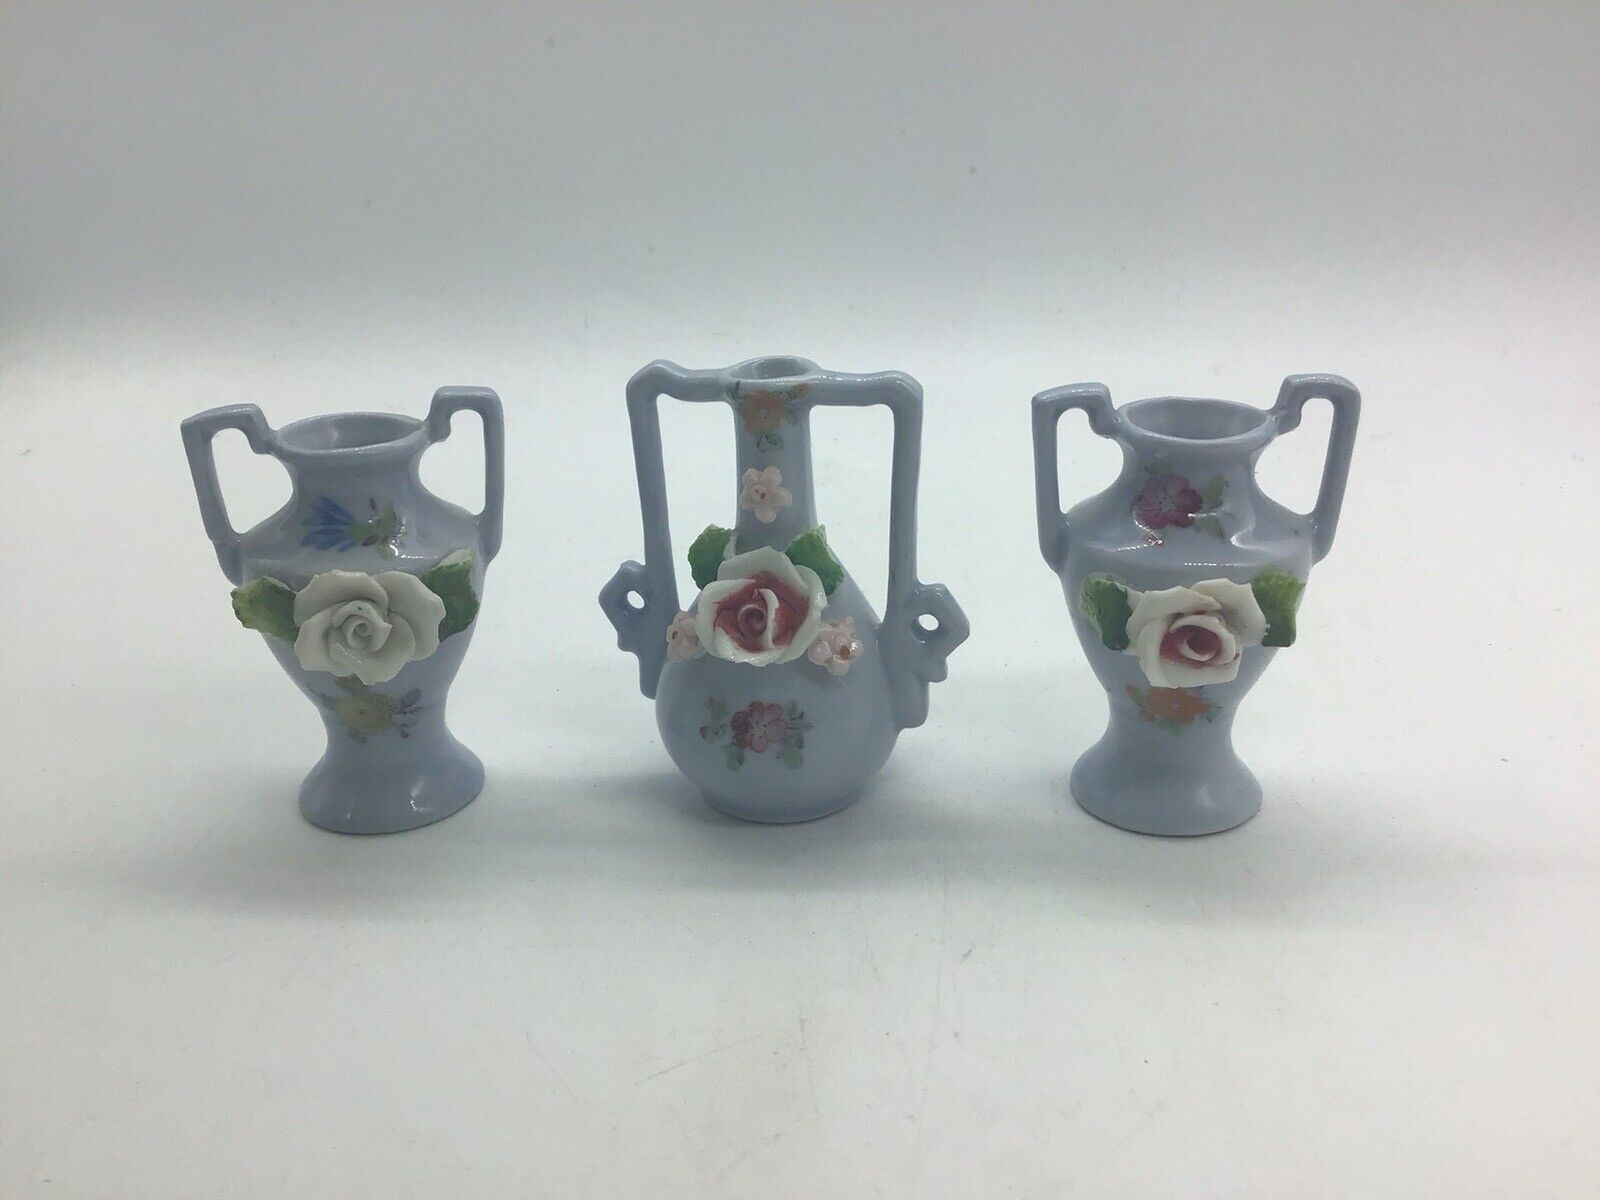 Miniature Two Handle Flower Vases (Made In Germany)